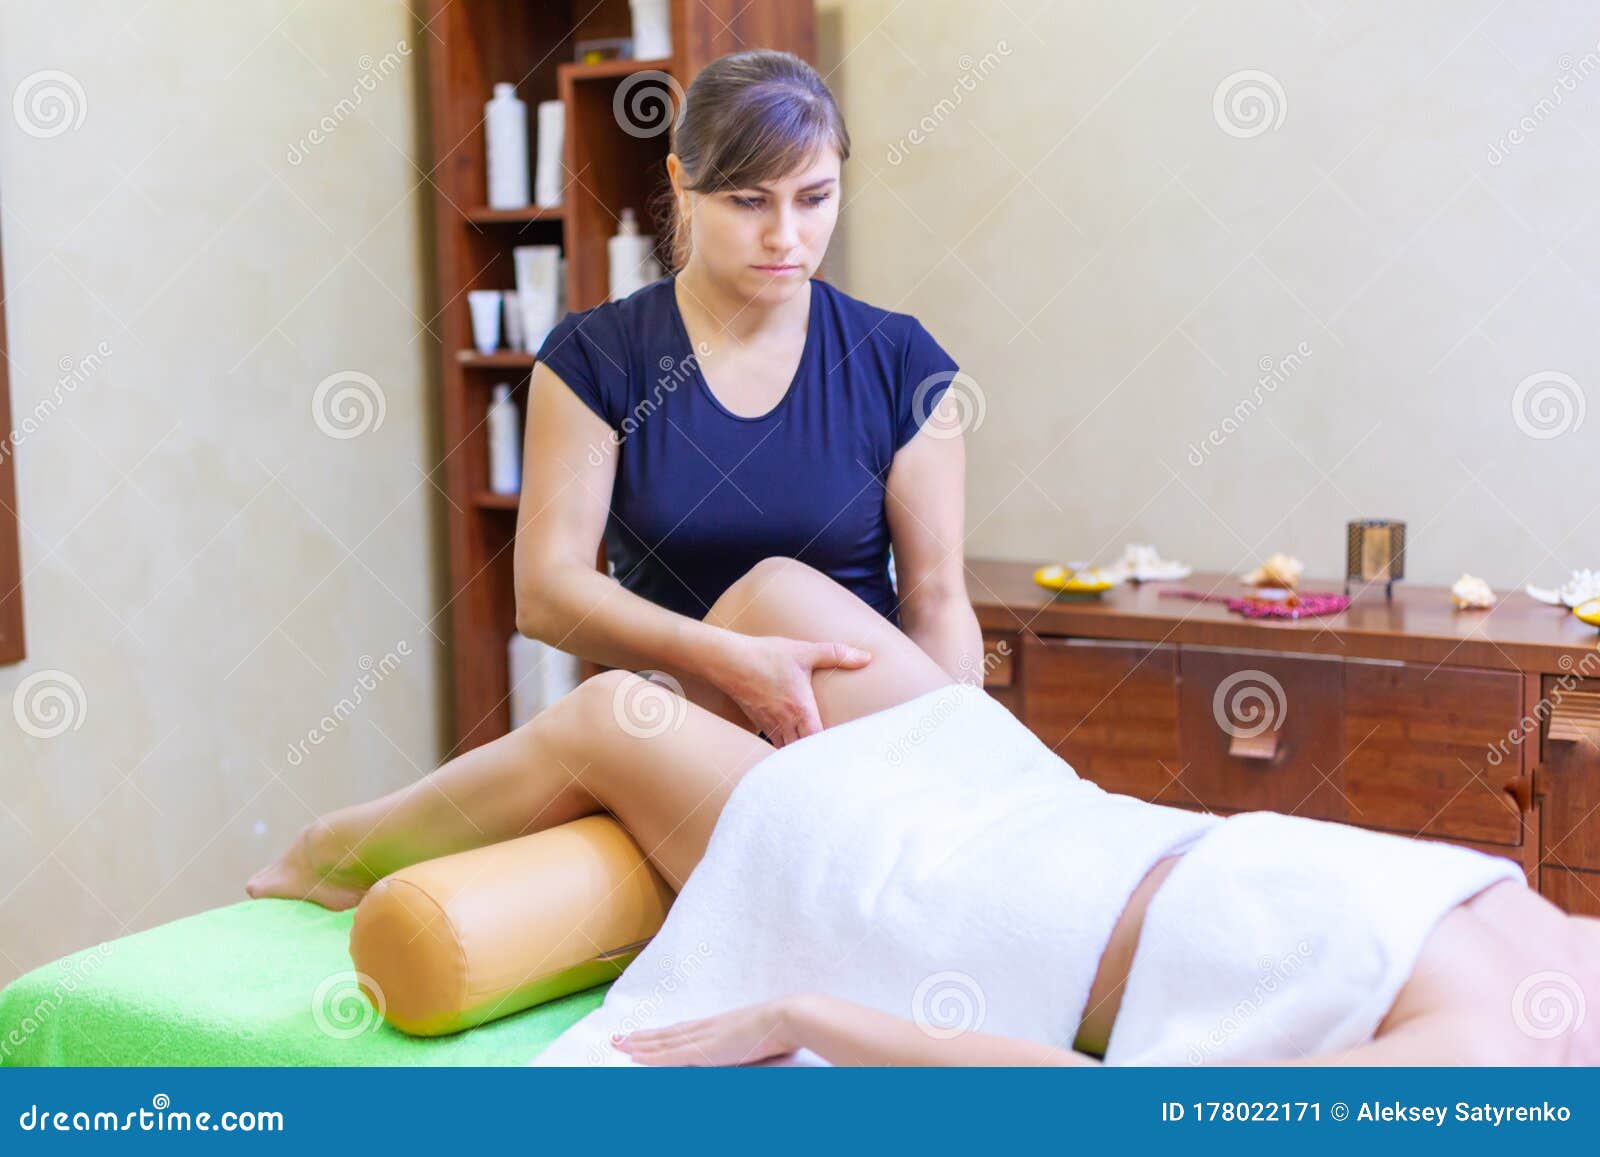 Front View Of Professional Massage Therapist Giving Massage On Woman